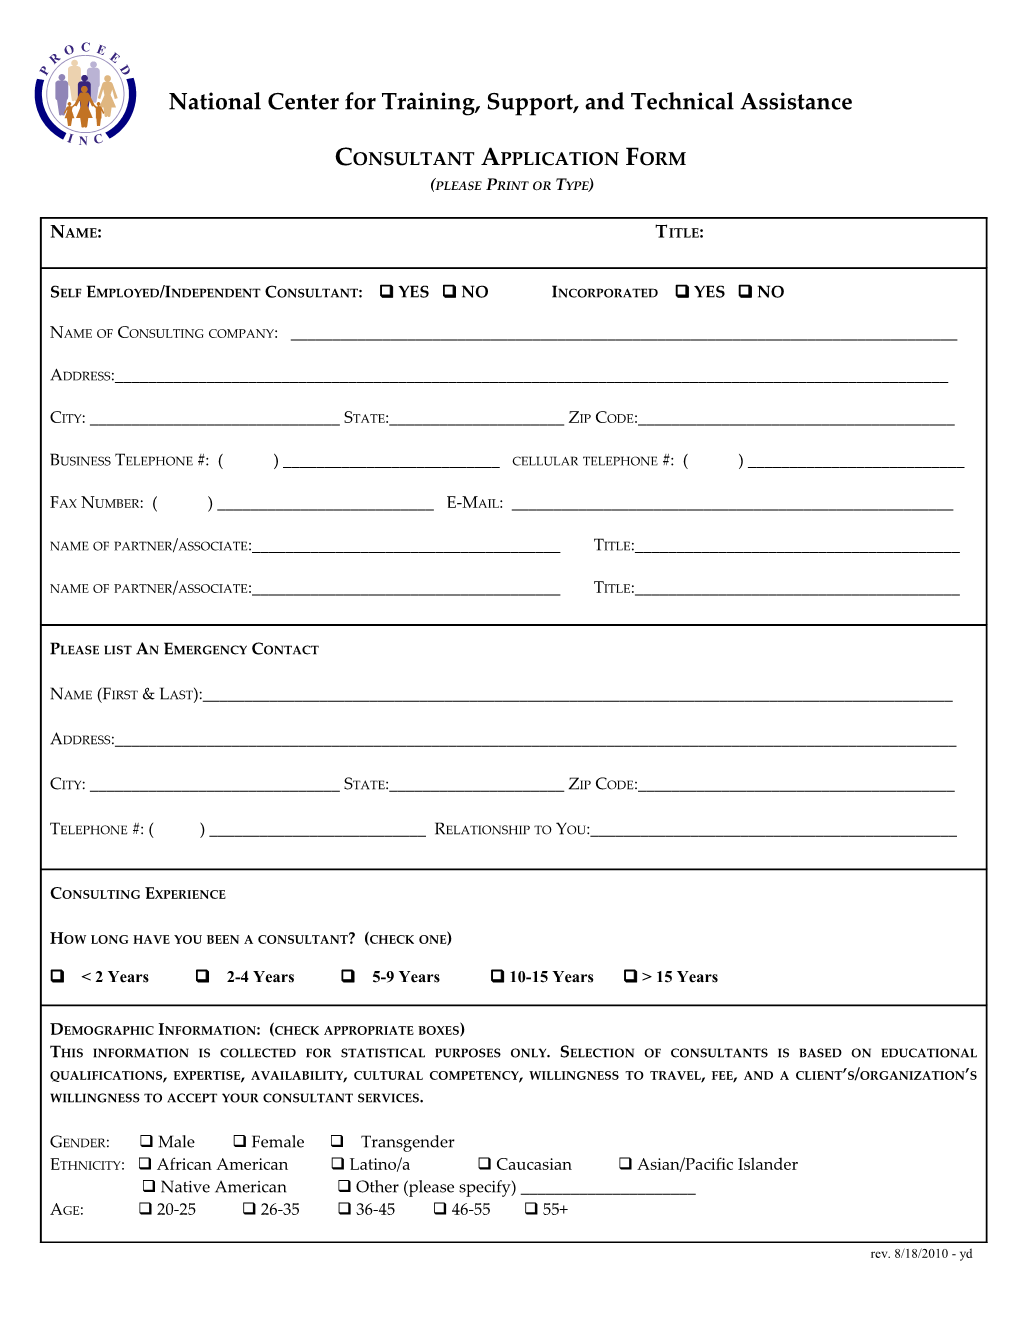 Consultant Information Form